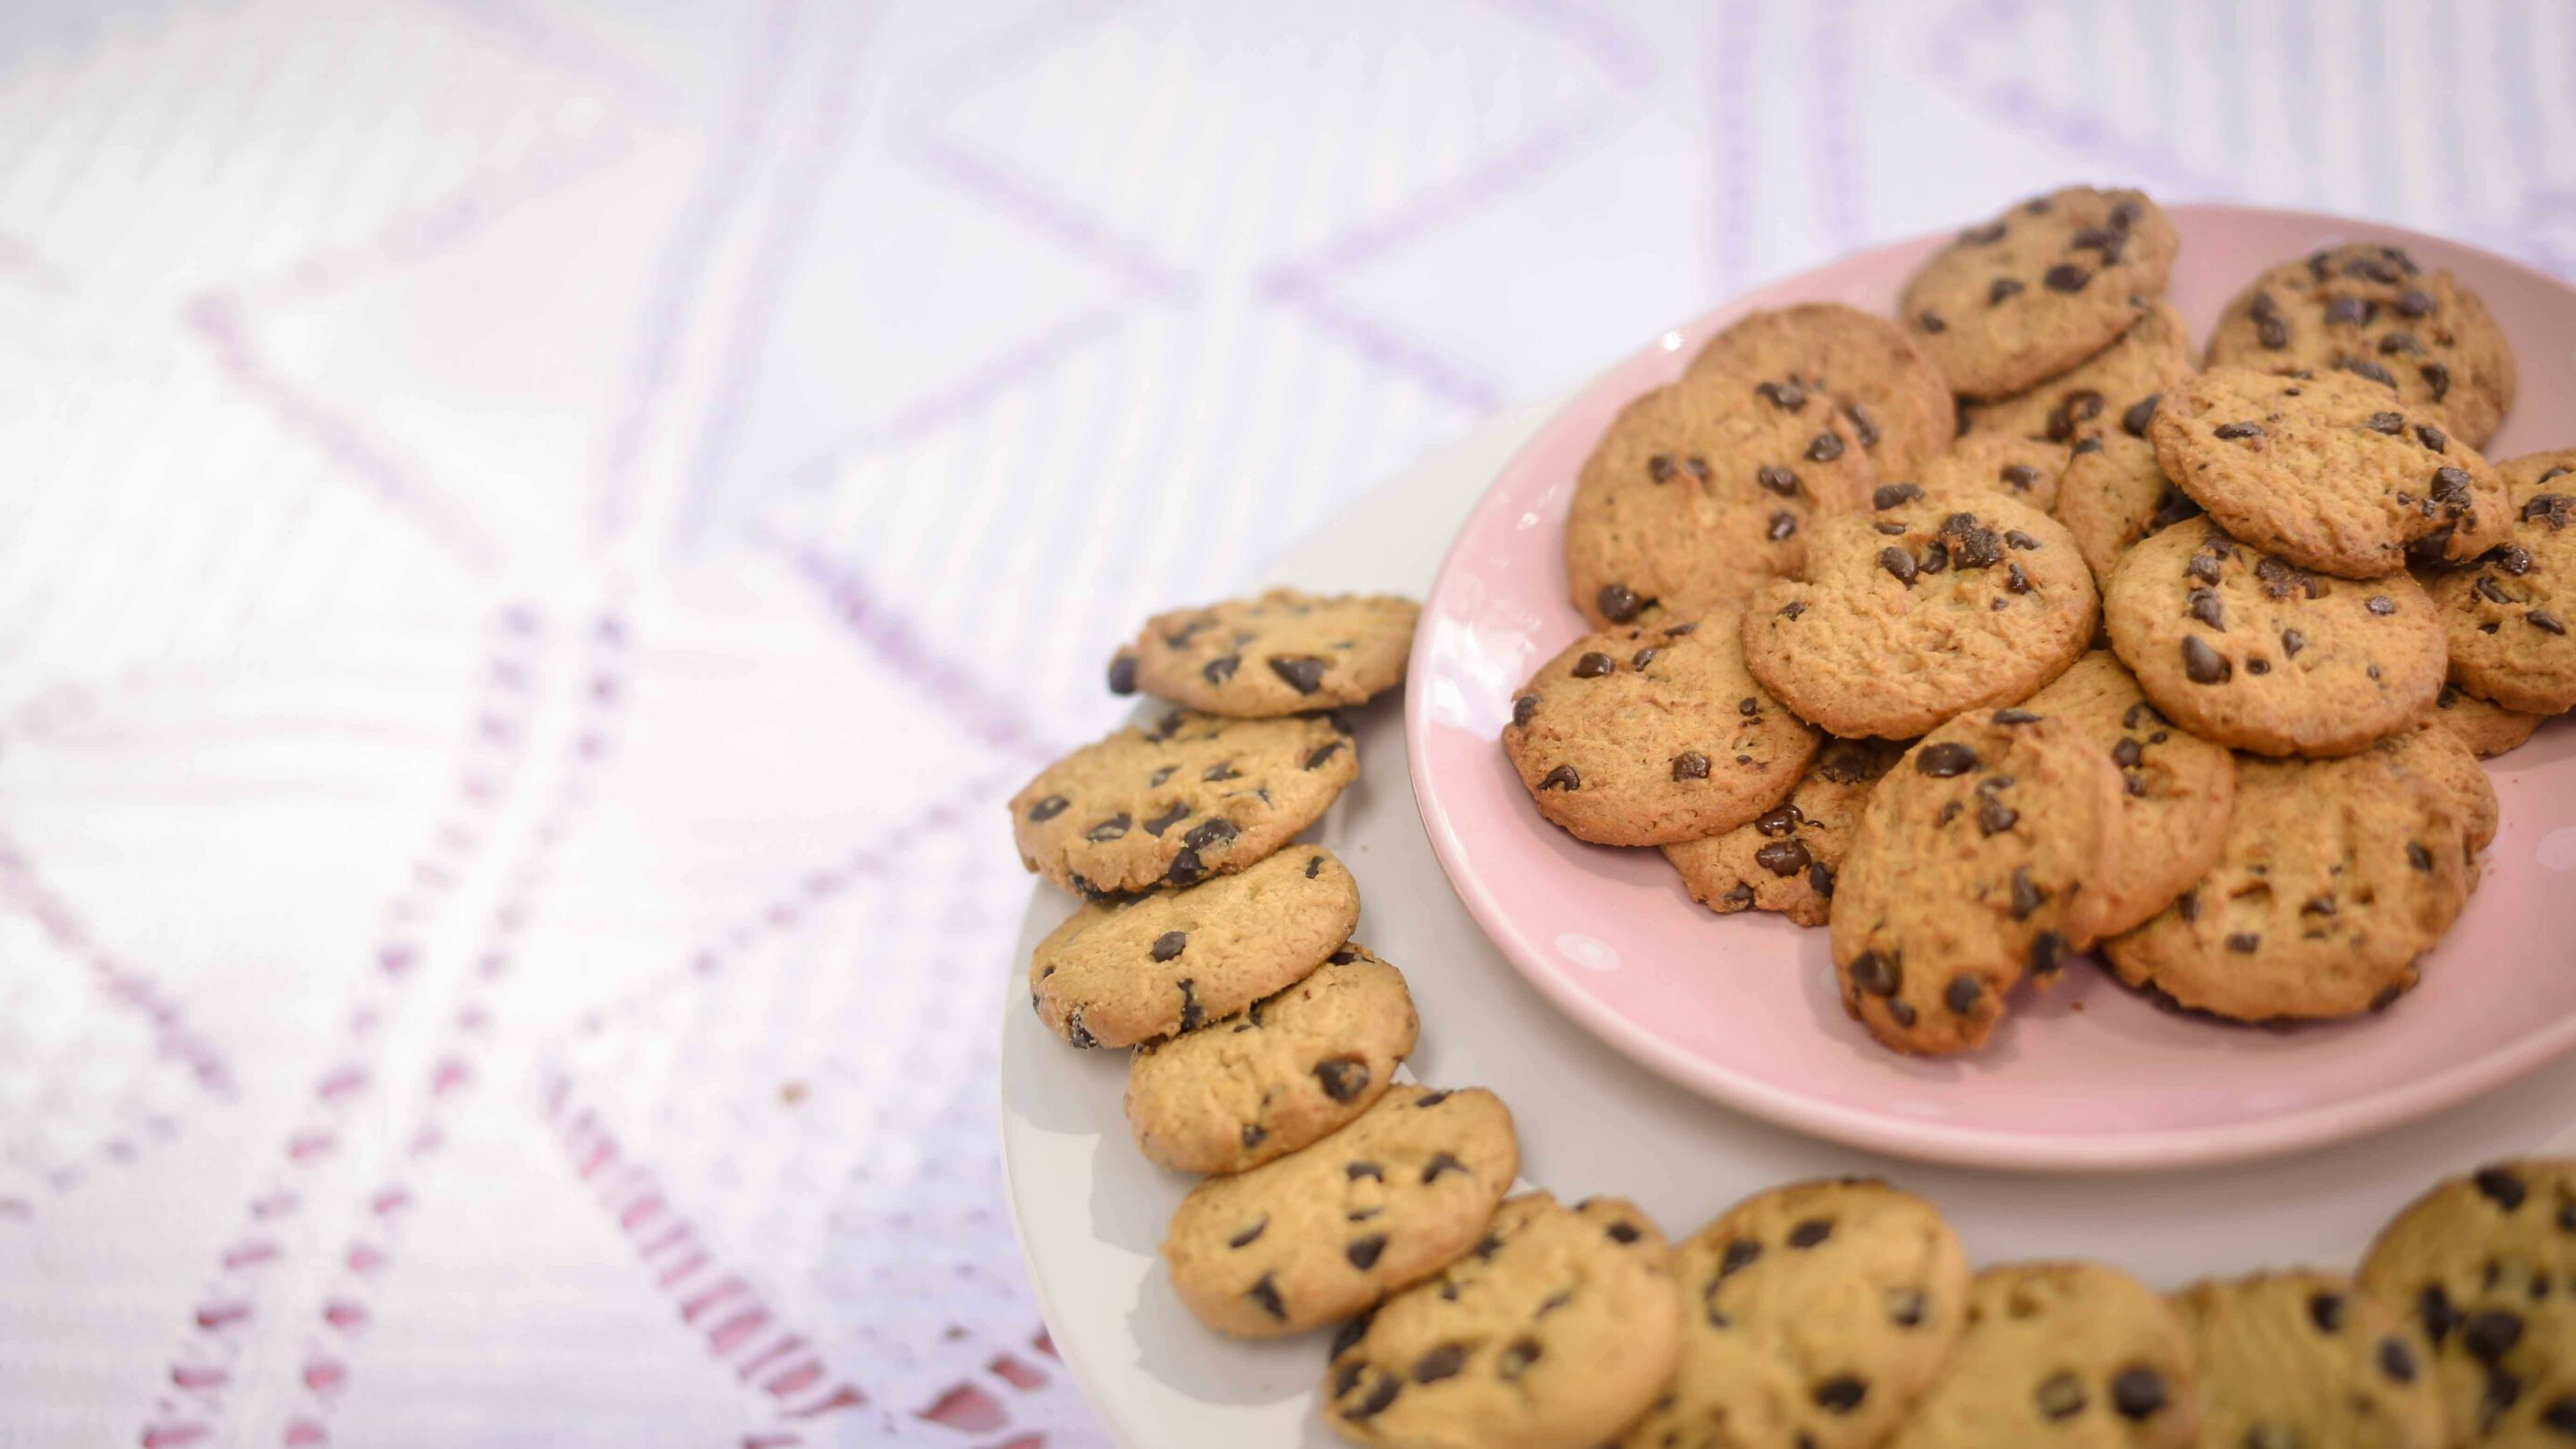 Plate full of chocolate chip cookies.